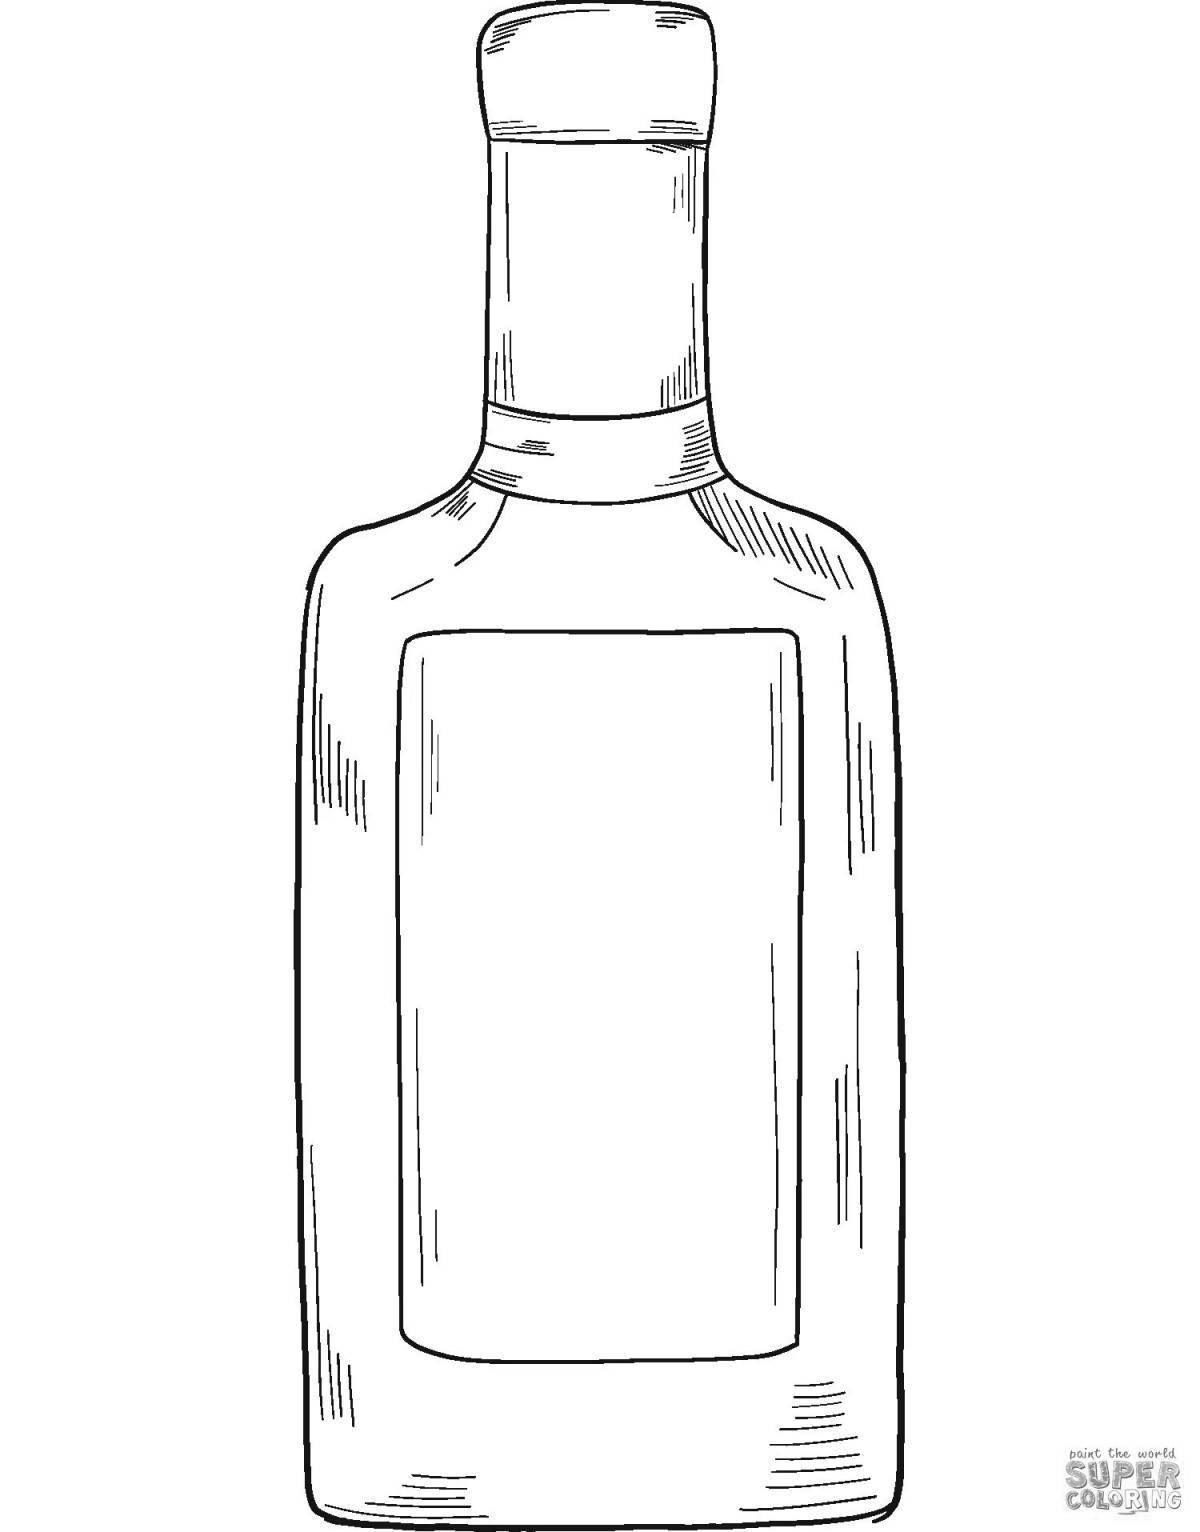 Exciting alcohol bottle coloring book